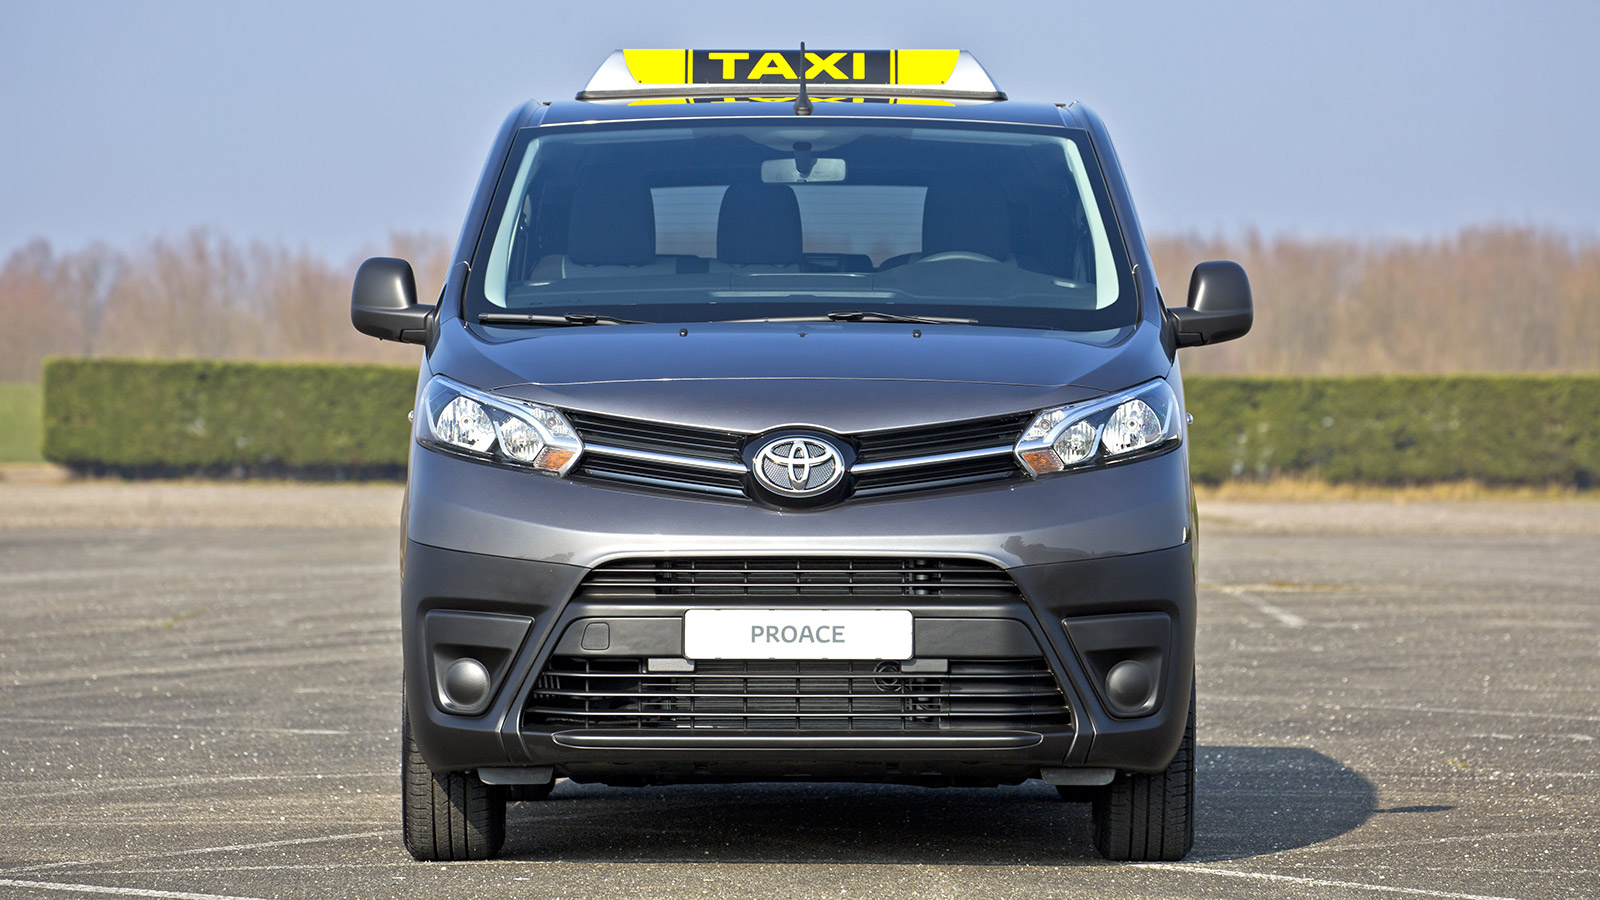 Toyota-Proace-exterieur-Taxi-voorkant